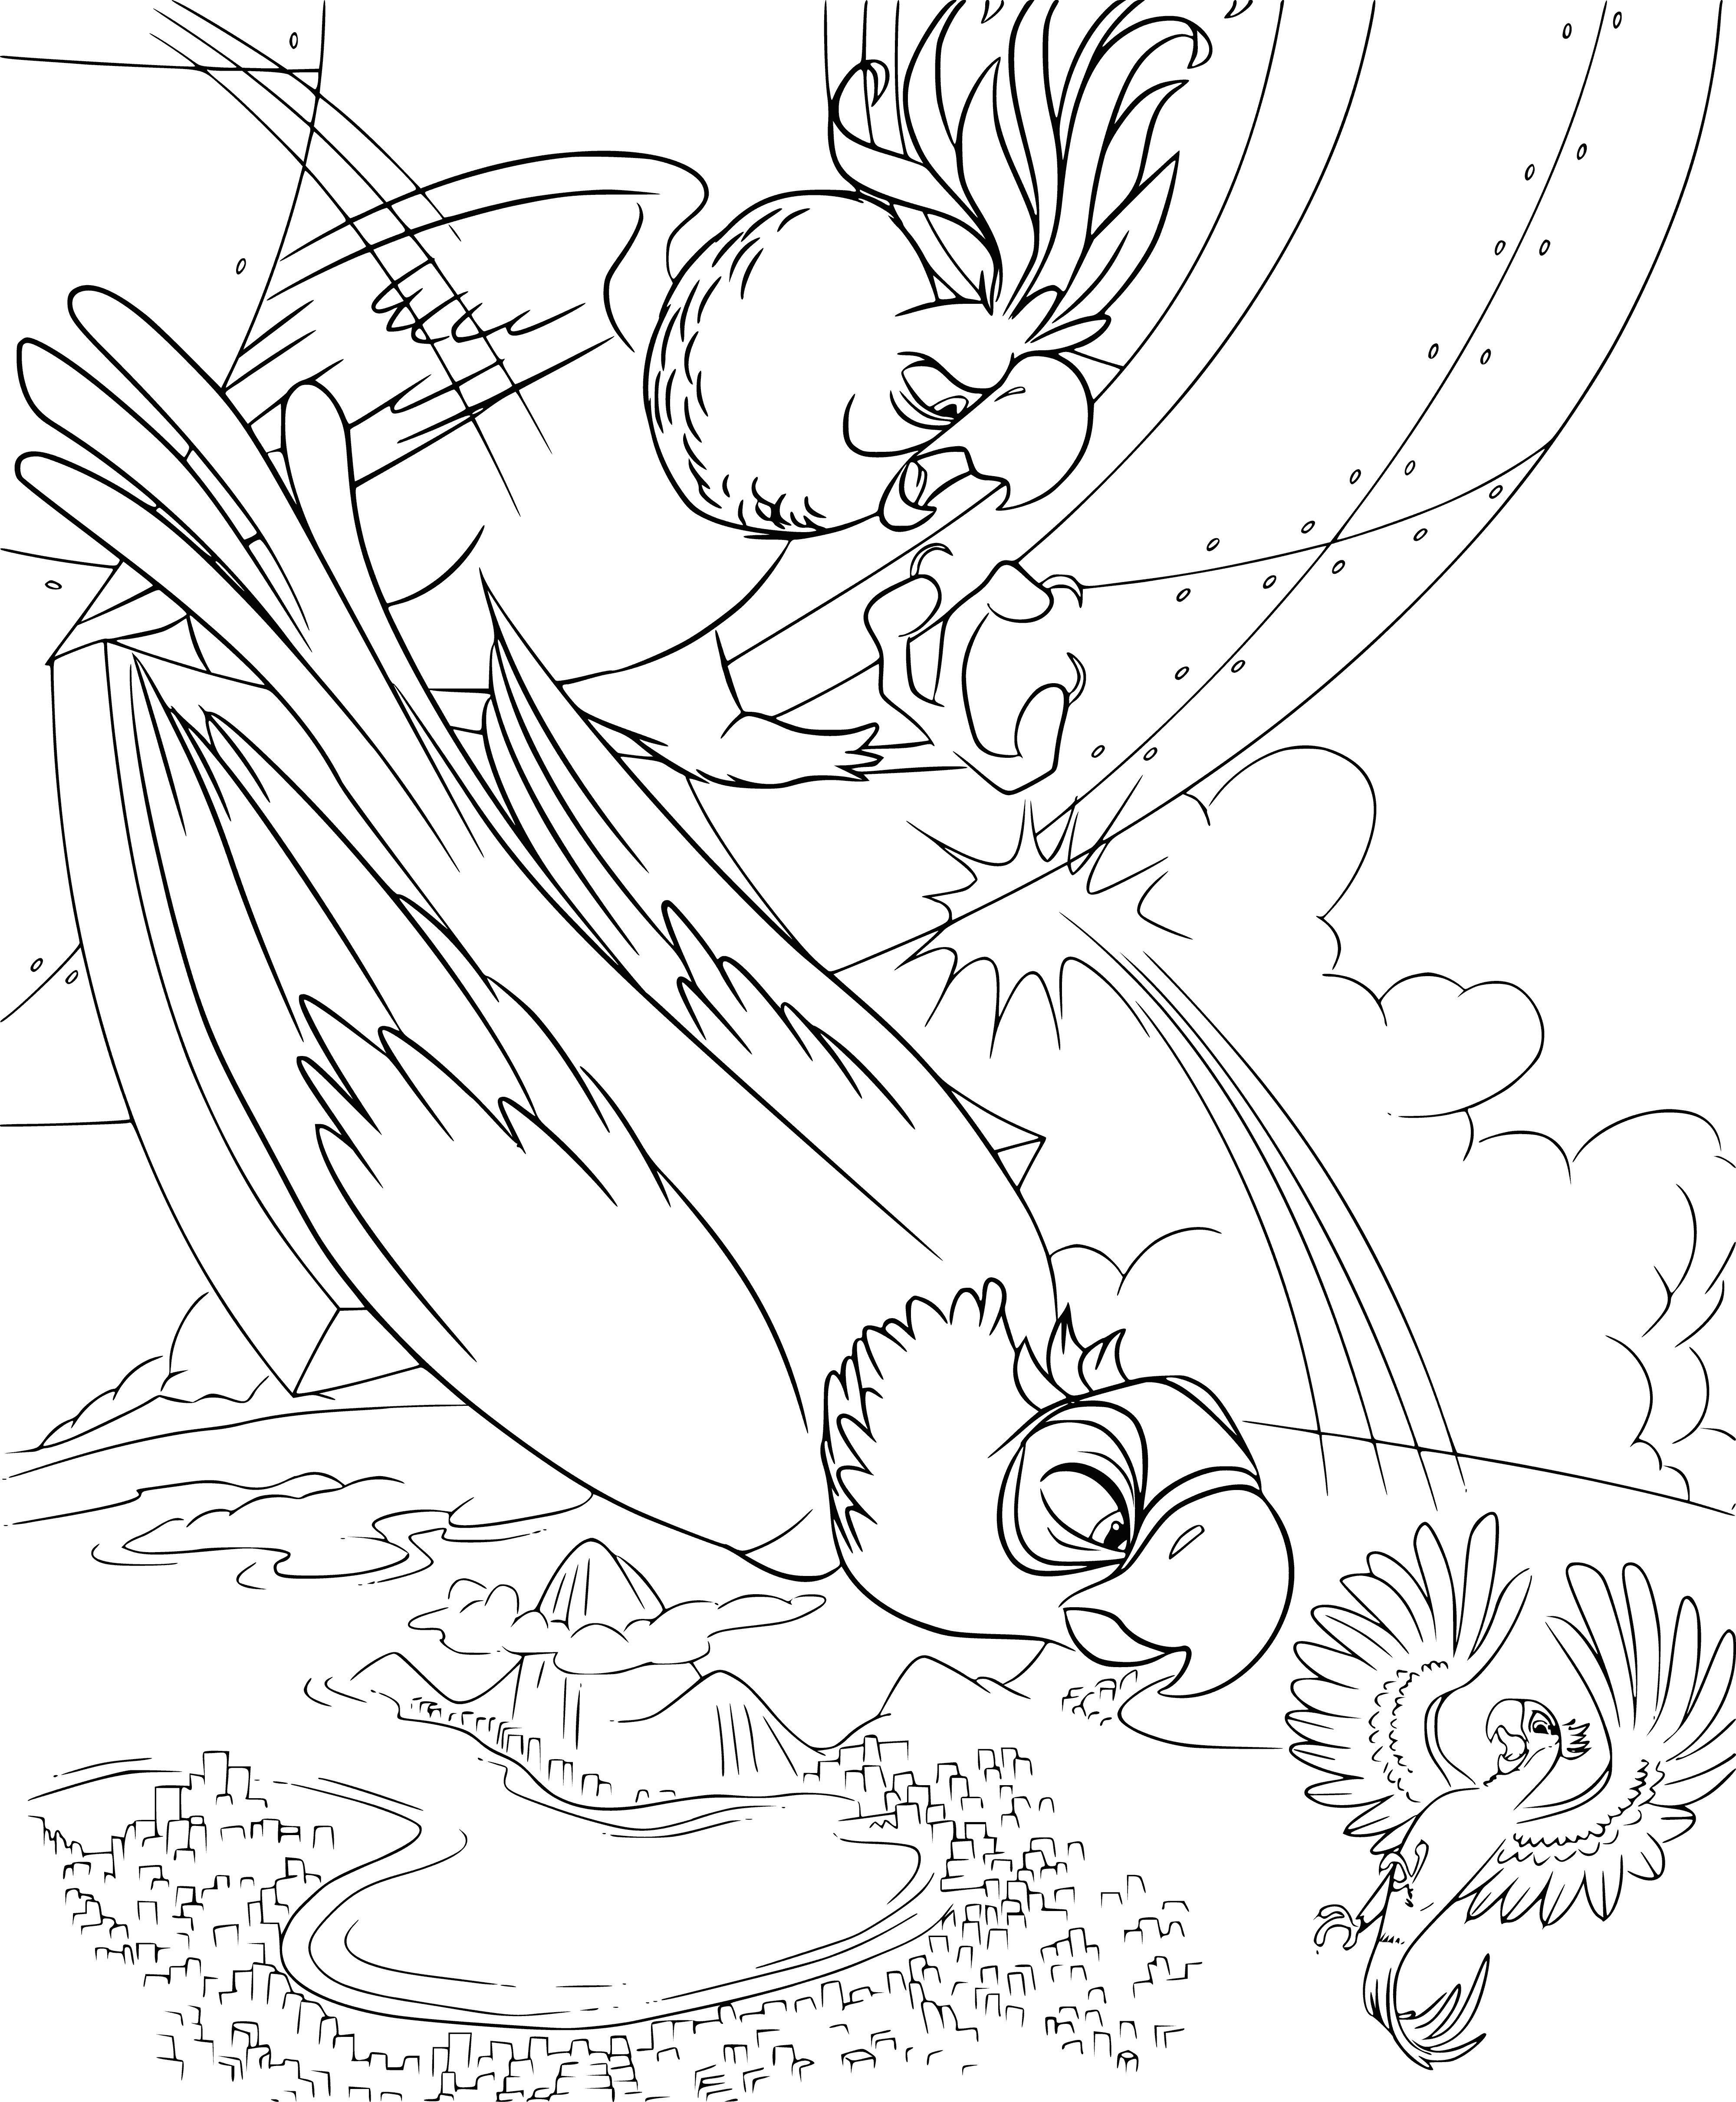 coloring page: The Rio is a beautiful place with rocks of all colors, including a large one with a hole in it through which a pearl falls.